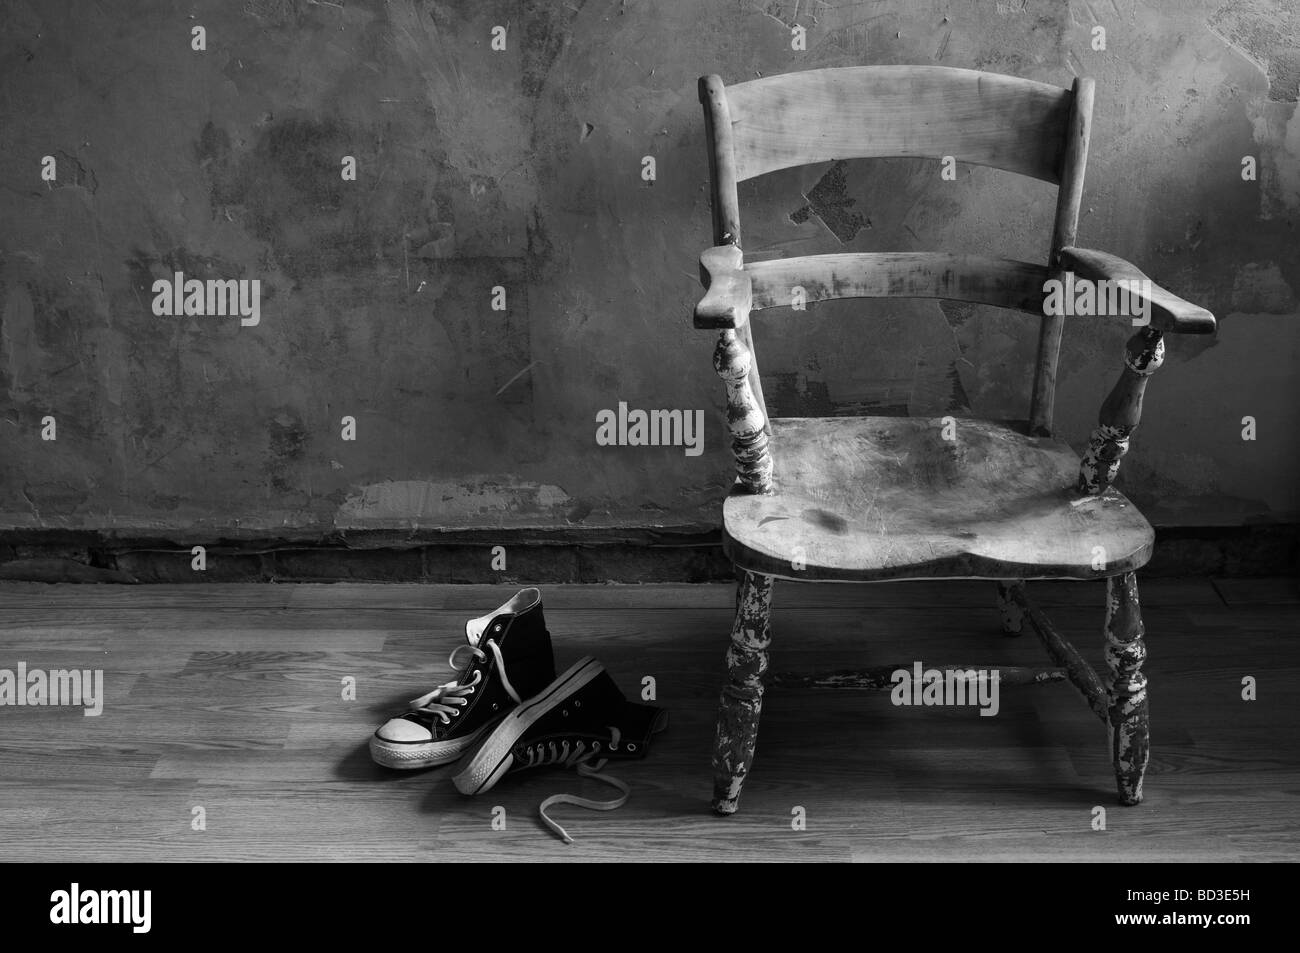 wooden chair on wooden floor, with bare plaster wall, shoes on floor Stock Photo